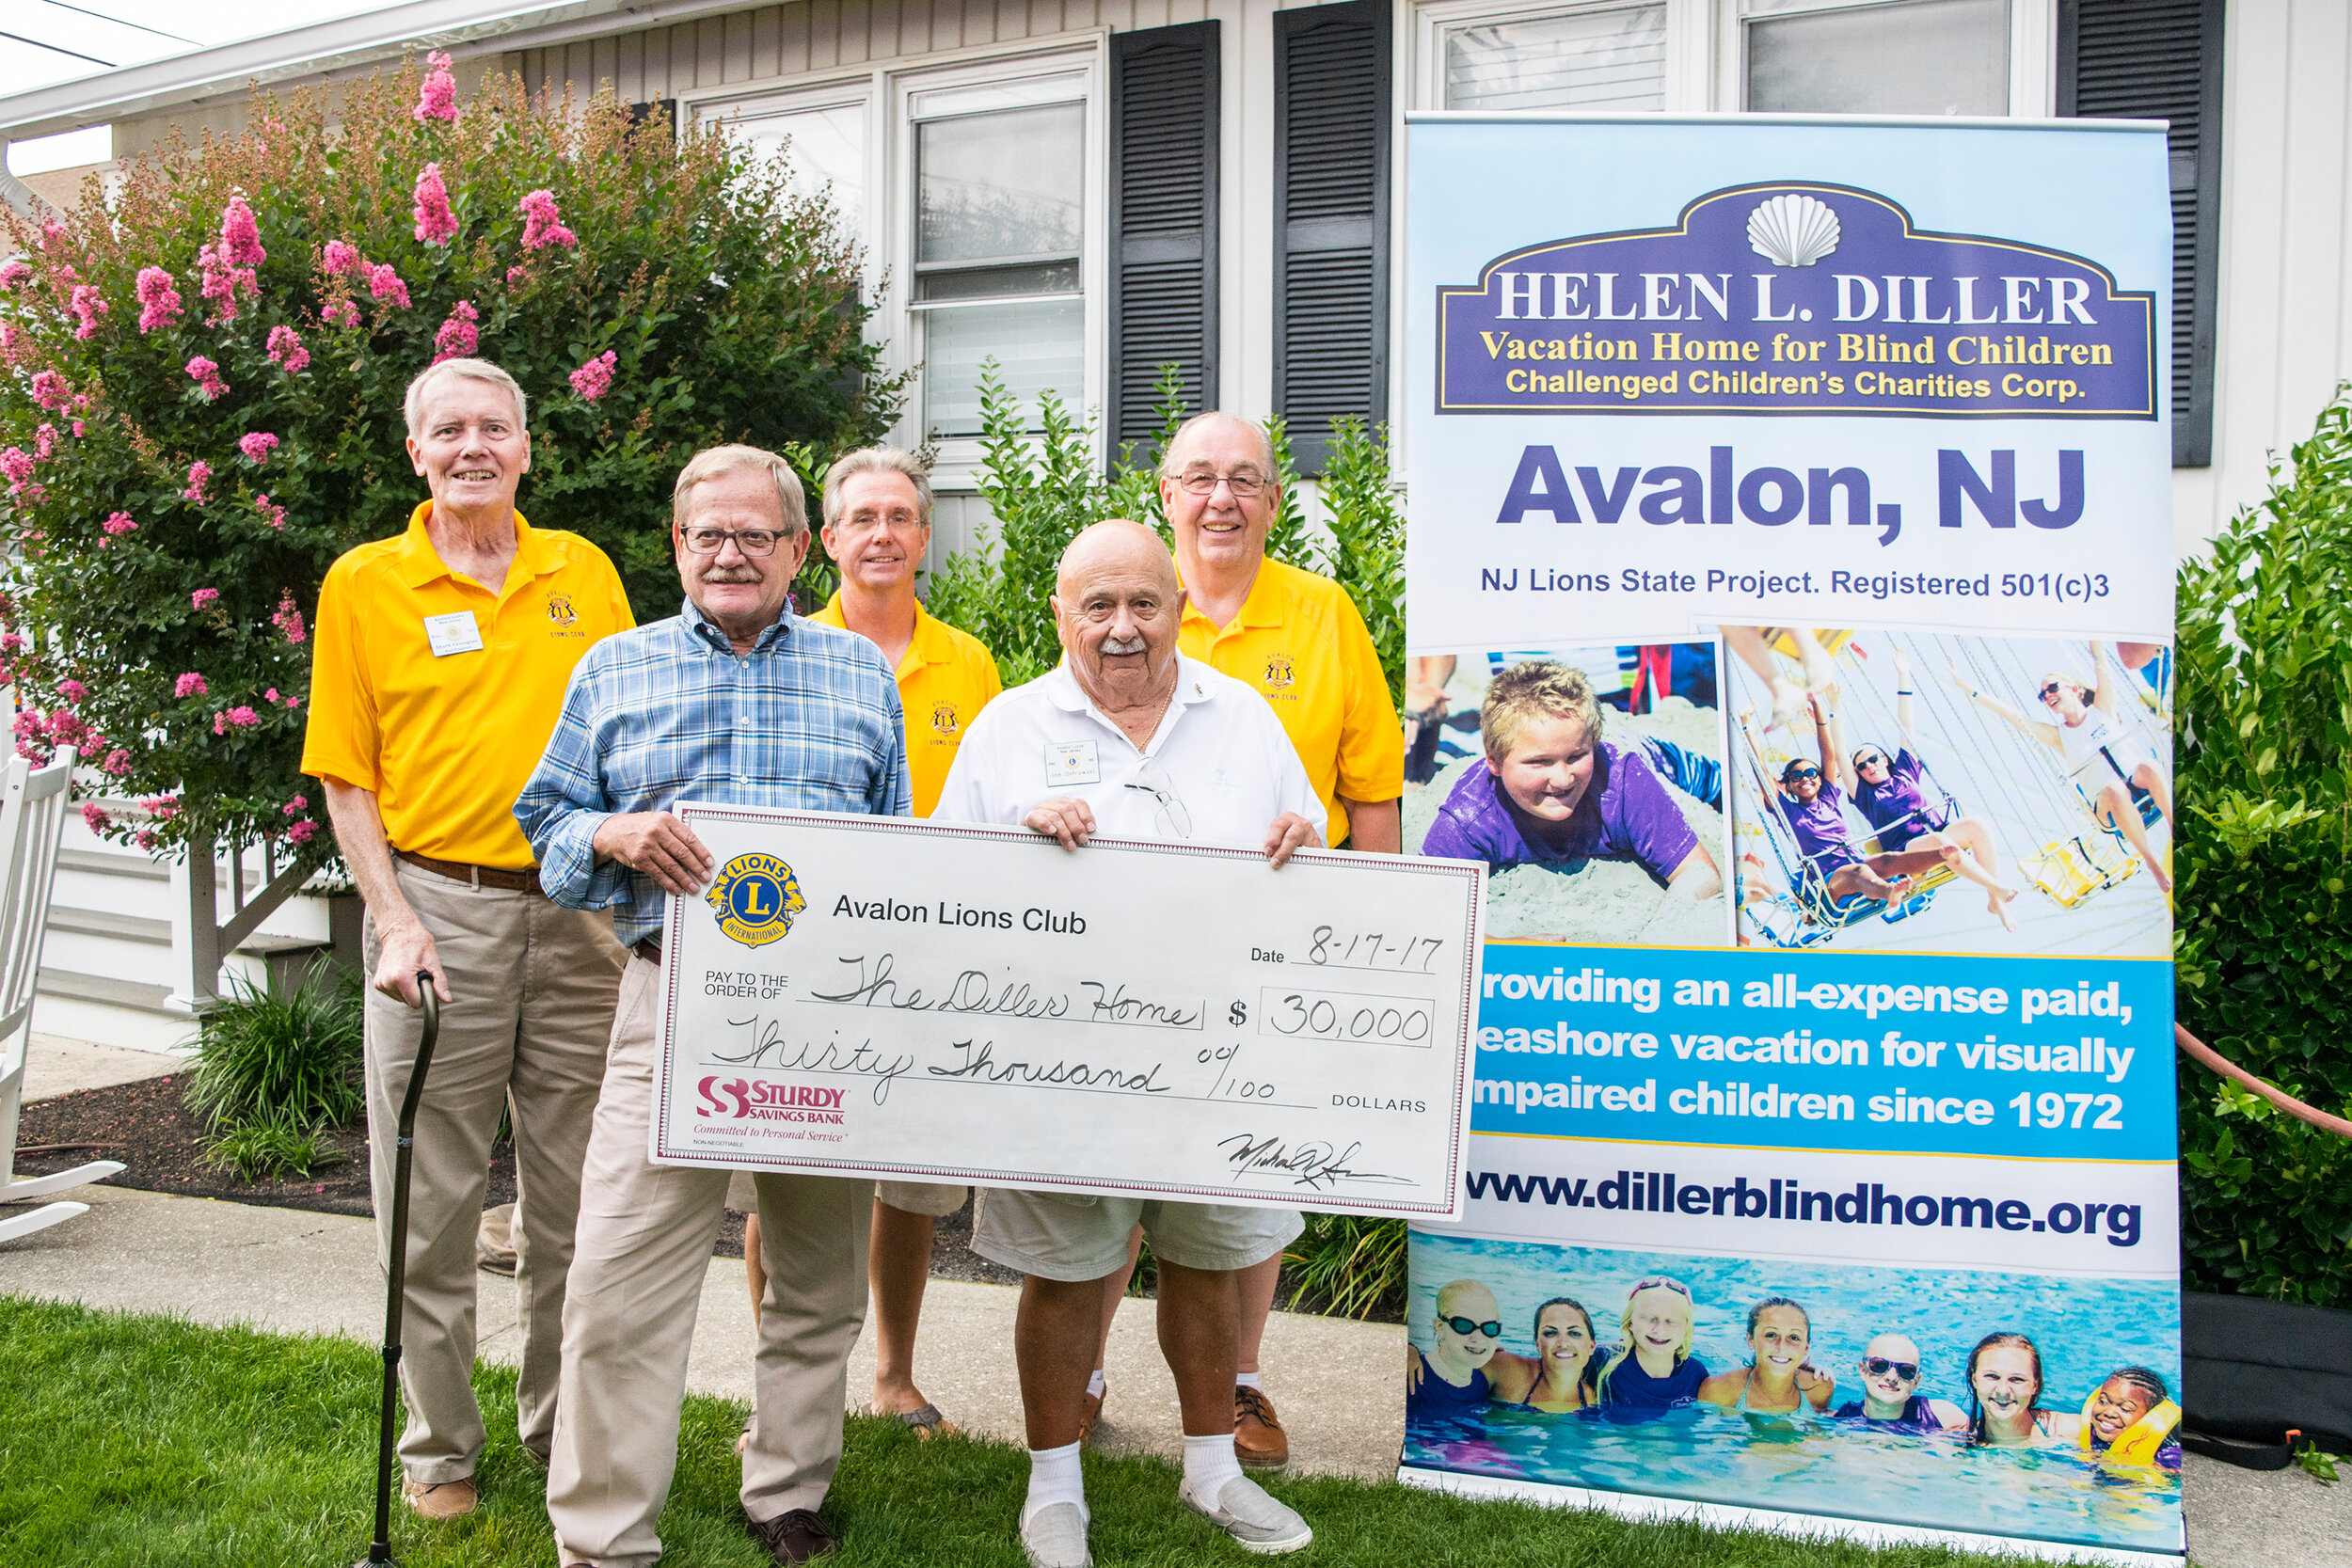 Avalon Lions Chuck Covington, Mike Sowers and John Molnar present a donation  to Helen L. Diller Vacation Home for Blind Children board members Doug Heun and Joe Ostrowski.